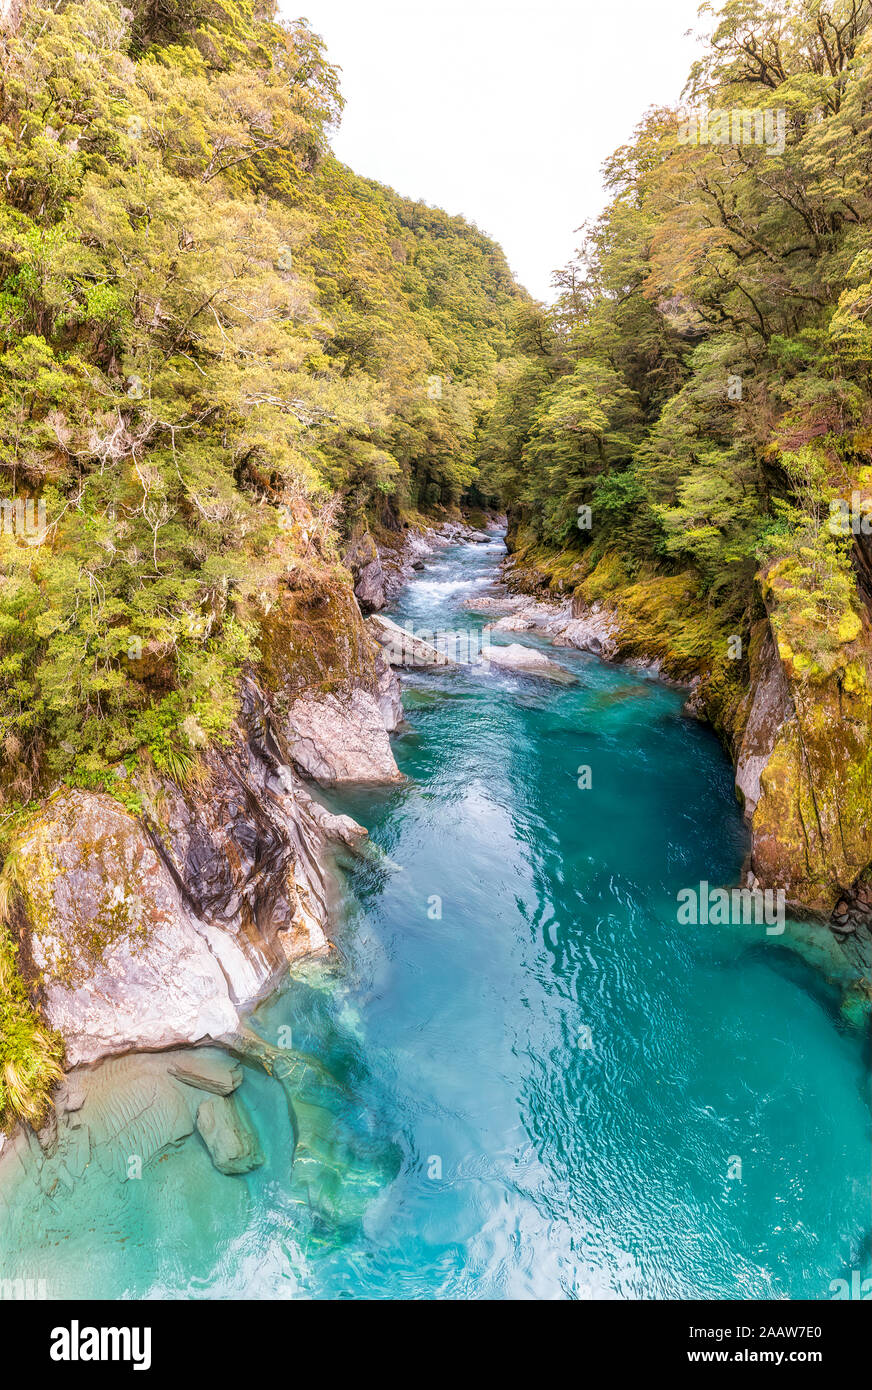 Makarora River, South Island, New Zealand Banque D'Images